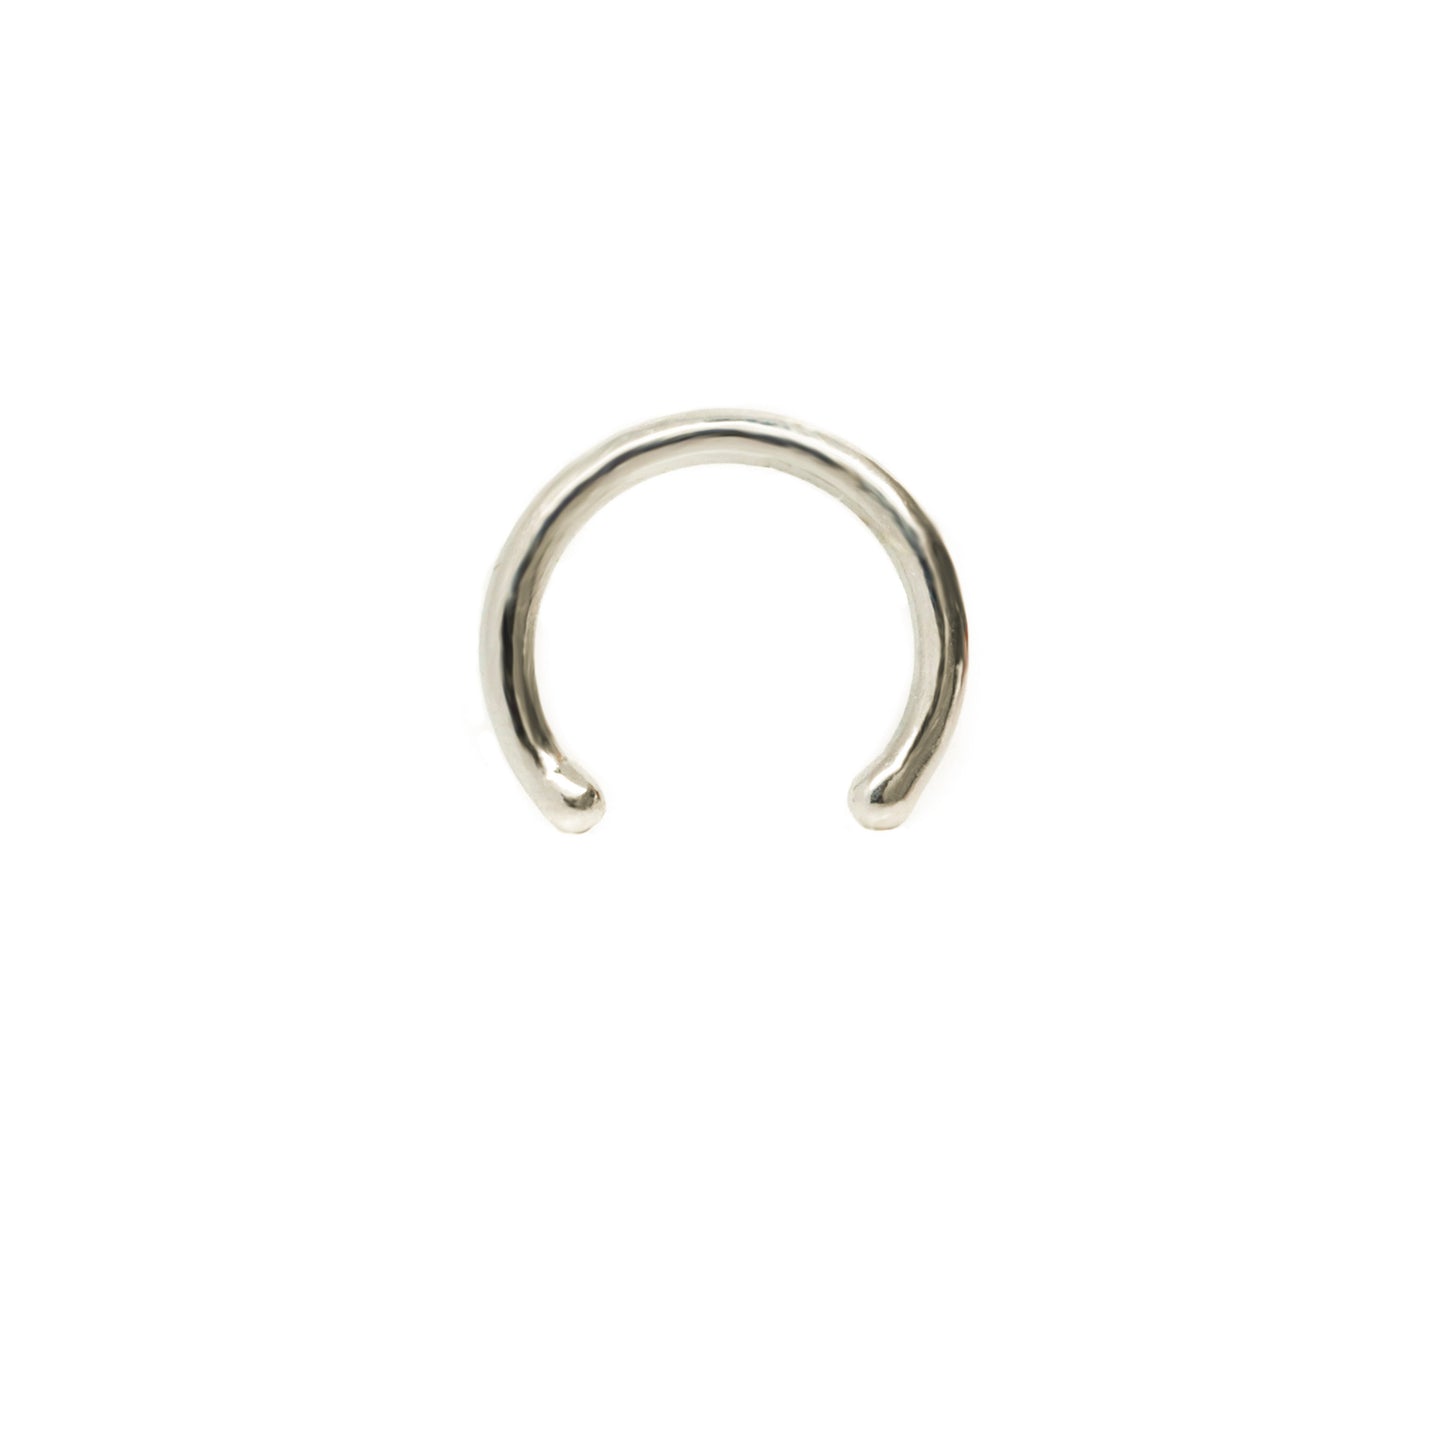 Solid 925 Silver | 16G Simple Nose Hoop Horseshoe With Stopper | Circular Barbell | Septum | Daith | 6mm 8mm 10mm - Sturdy South